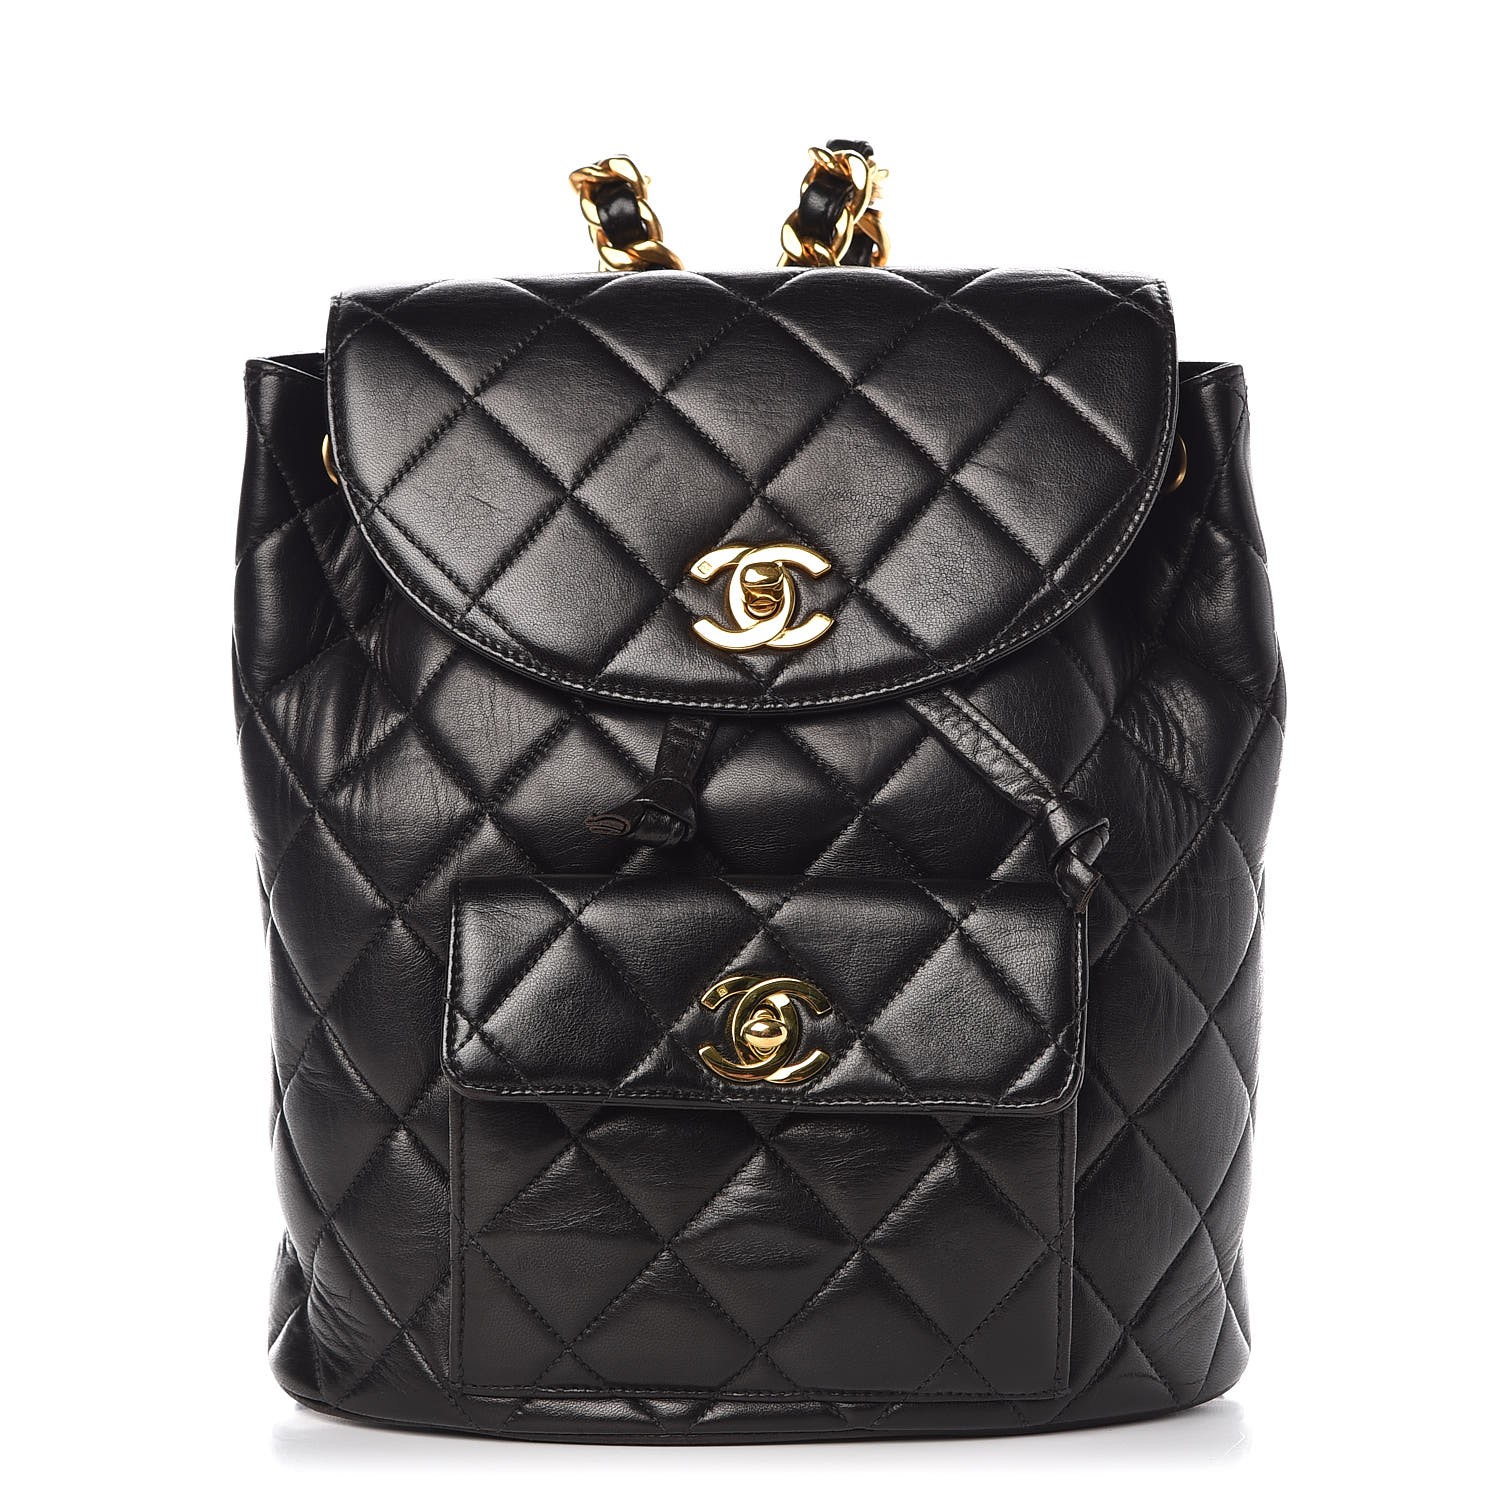 CHANEL Lambskin Quilted Drawstring Backpack Black 311048